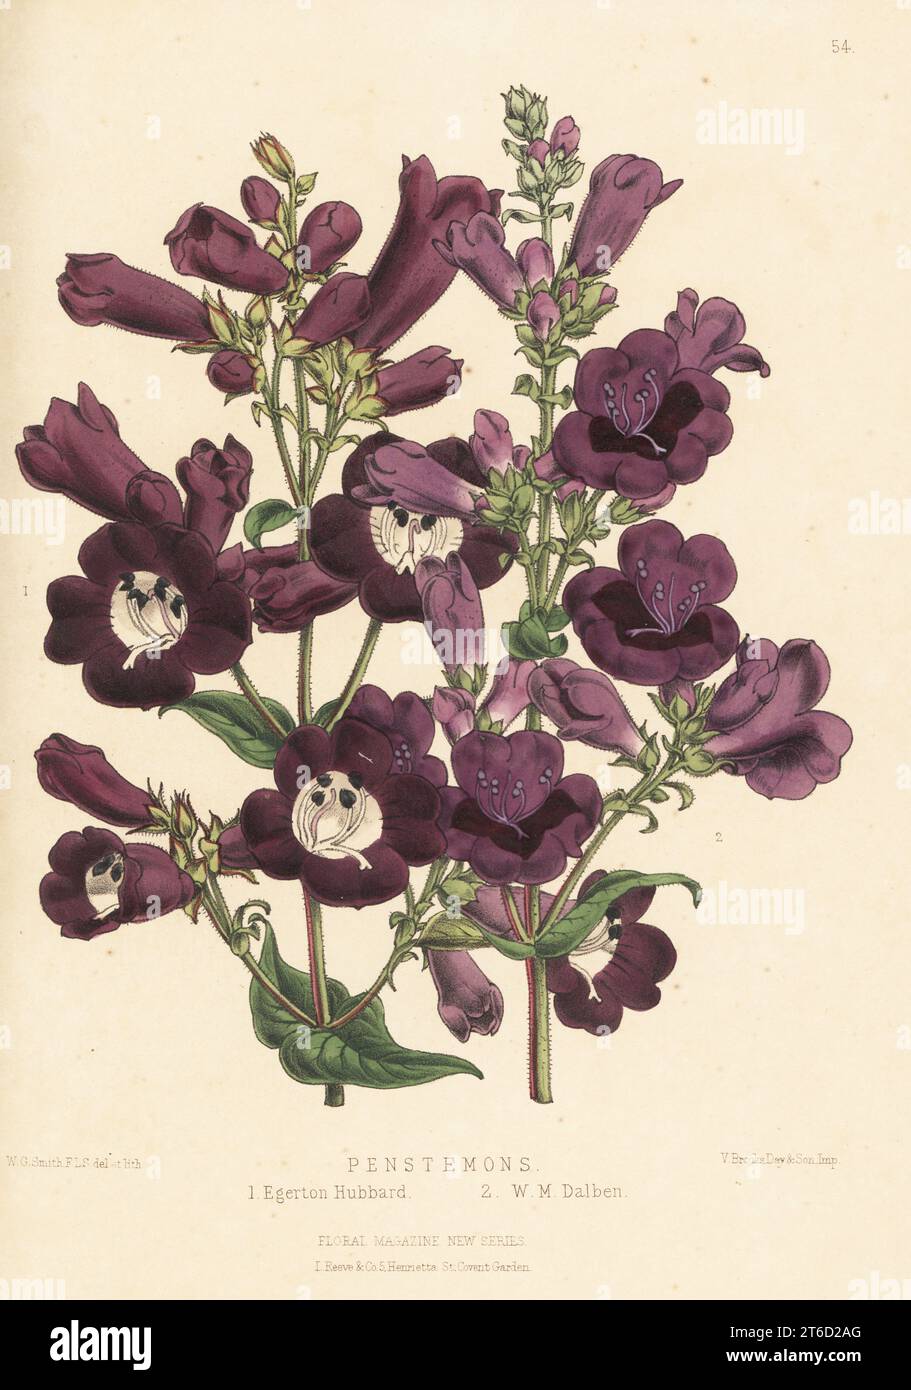 Beardtongue or Penstemon hybrids: Egerton Hubbard 1, and W. M. Dalben 2. Raised at Downie, Laird and Laing's nursery, Edinburgh. Handcolored botanical illustration drawn and lithographed by Worthington George Smith from Henry Honywood Dombrain's Floral Magazine, New Series, Volume 2, L. Reeve, London, 1873. Lithograph printed by Vincent Brooks, Day & Son. Stock Photo